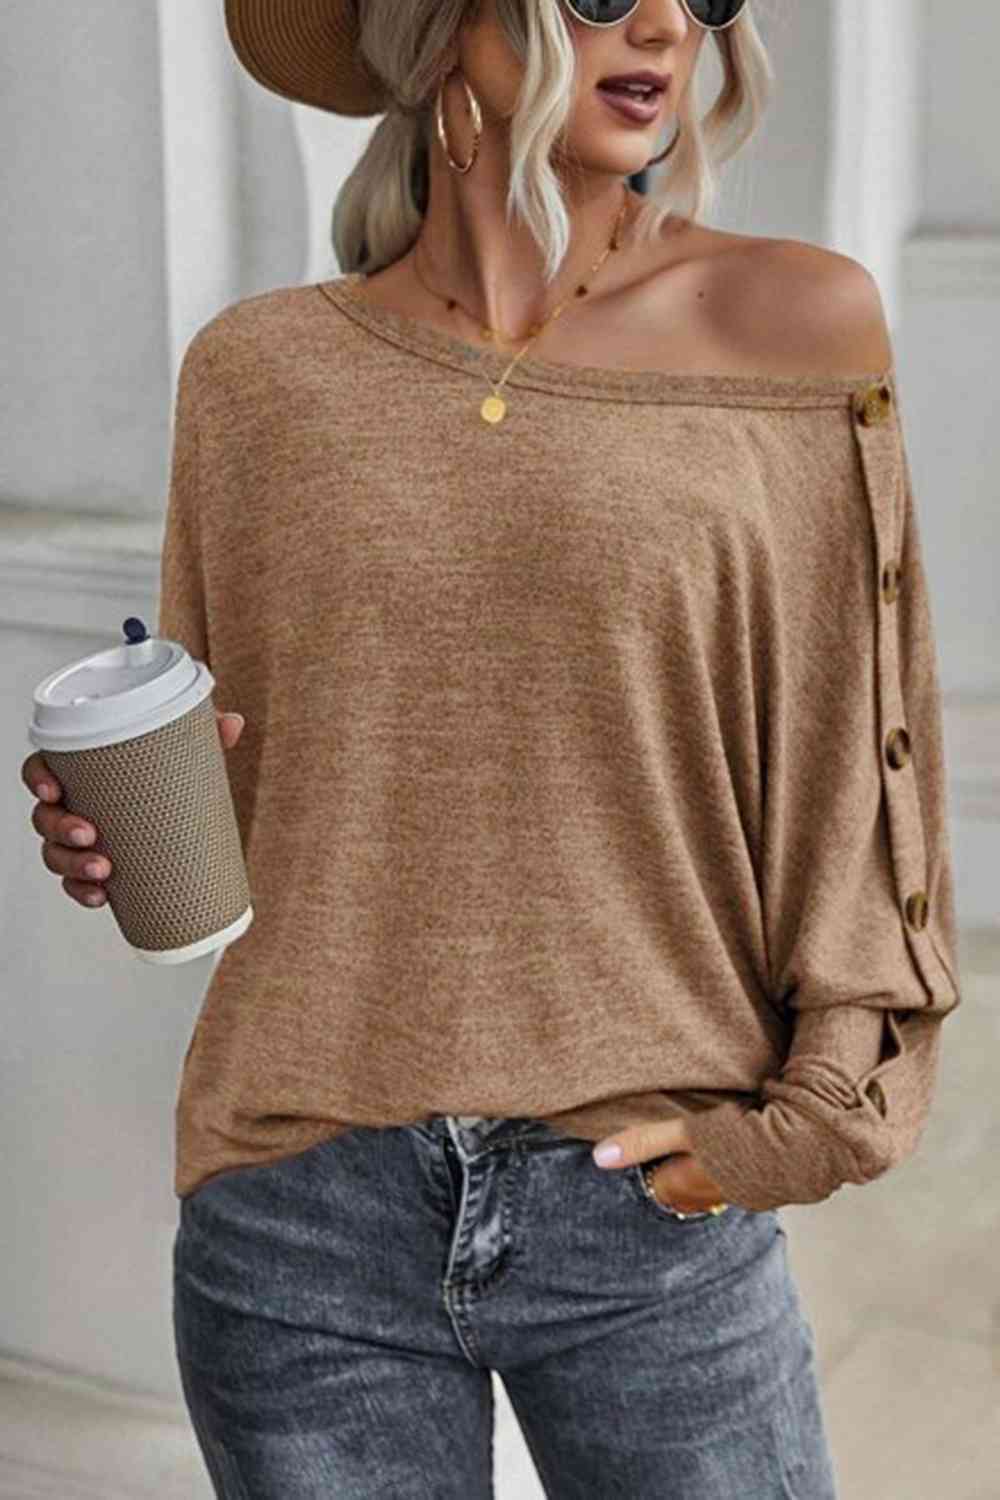 Boat Neck Buttoned Long Sleeve Top Blouse